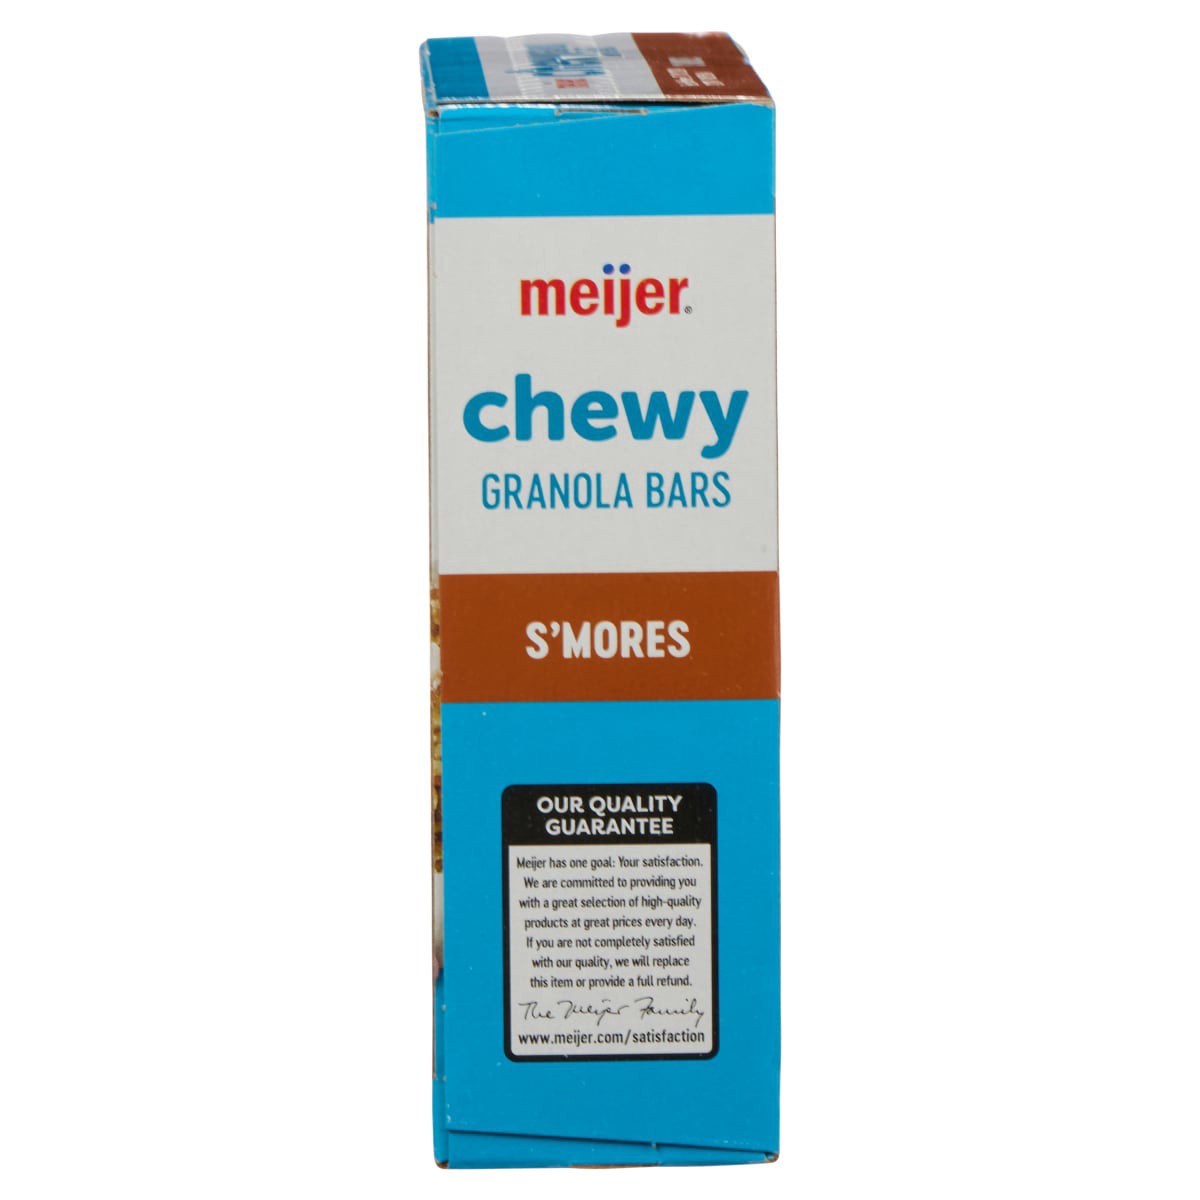 slide 13 of 29, Meijer Chewy Granola Bar, S'mores, 6.77 oz, 8 ct